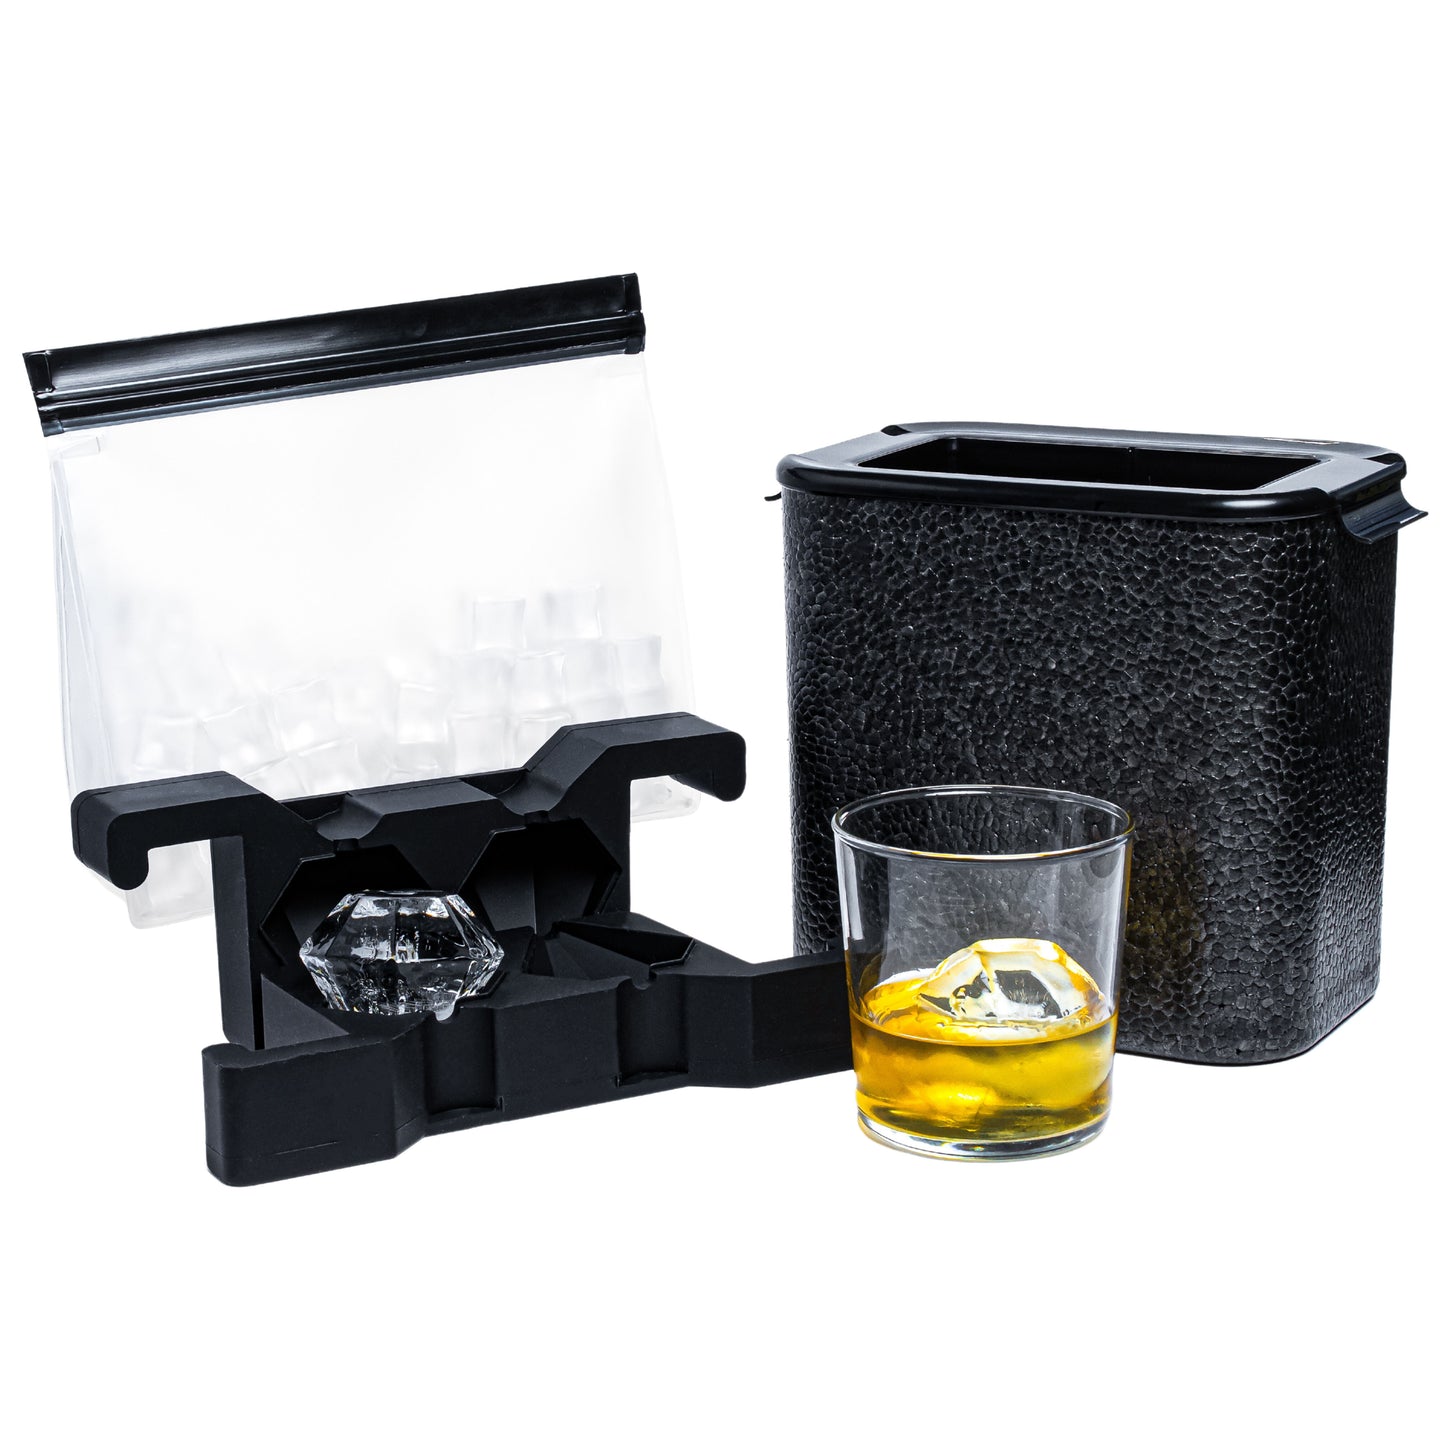 PREMIUM X-LARGE CRYSTAL CLEAR ICE MOULDS